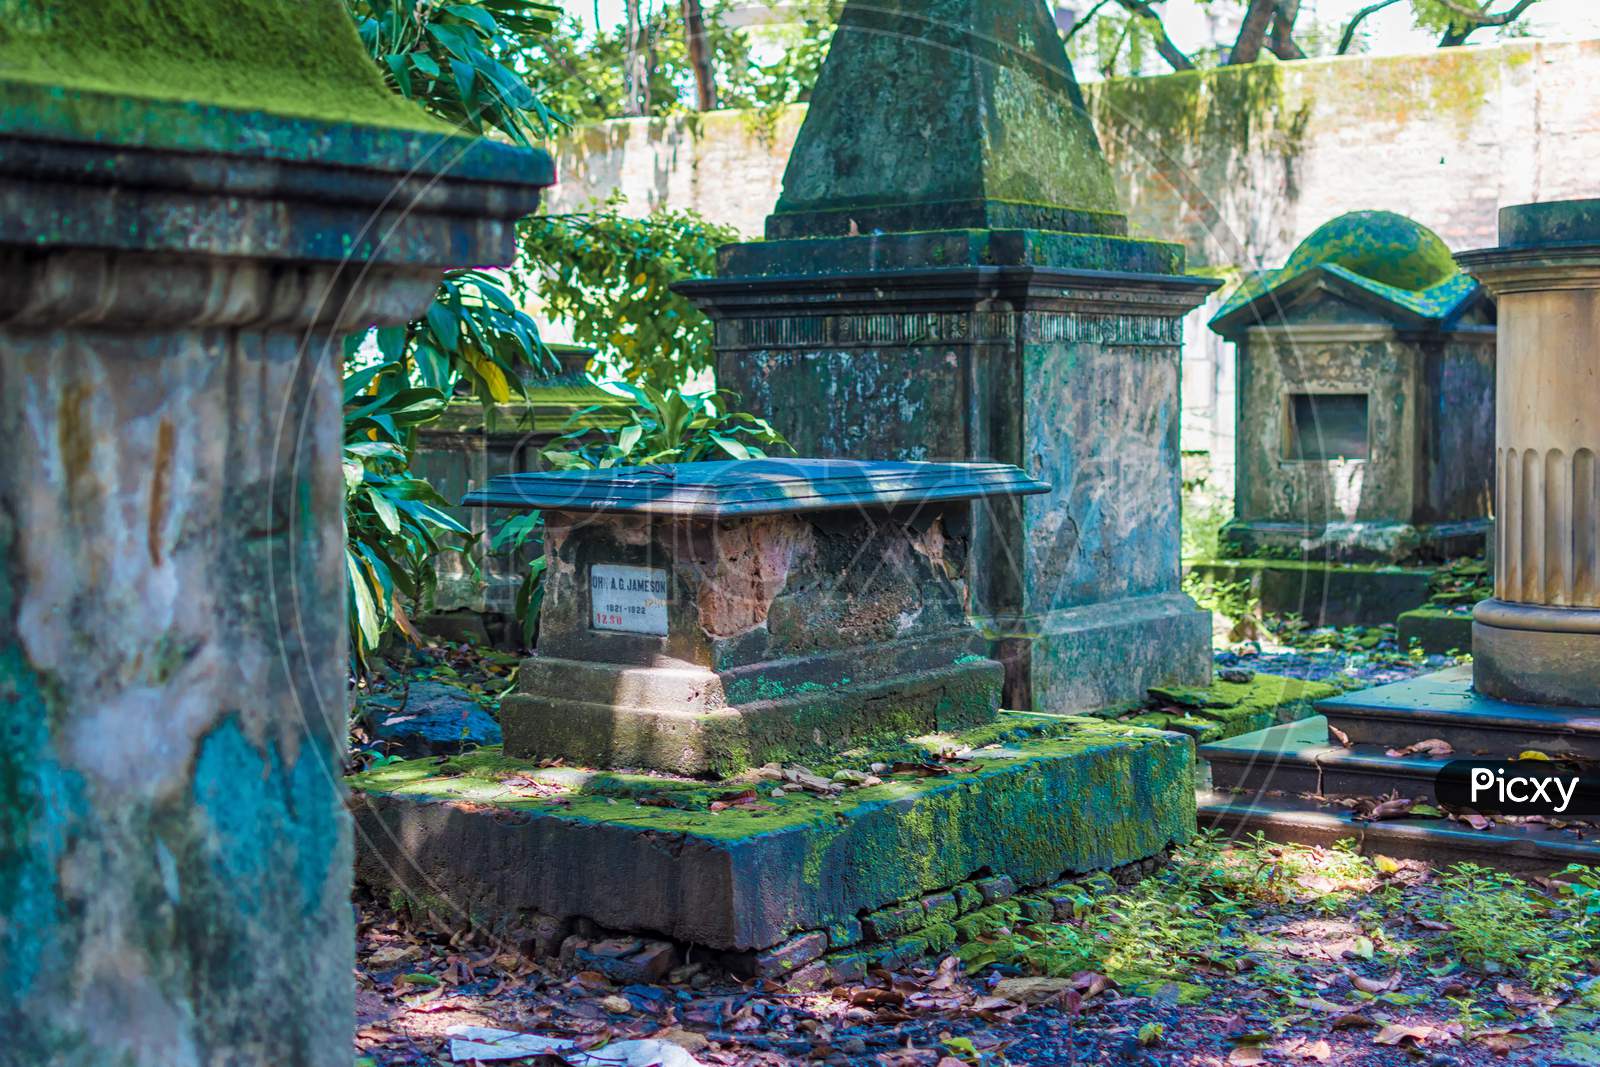 Ancient Gravestones Tombs Of South Park Street Cemetery In Kolkata, India. The Largest Christian Cemetery In Asia